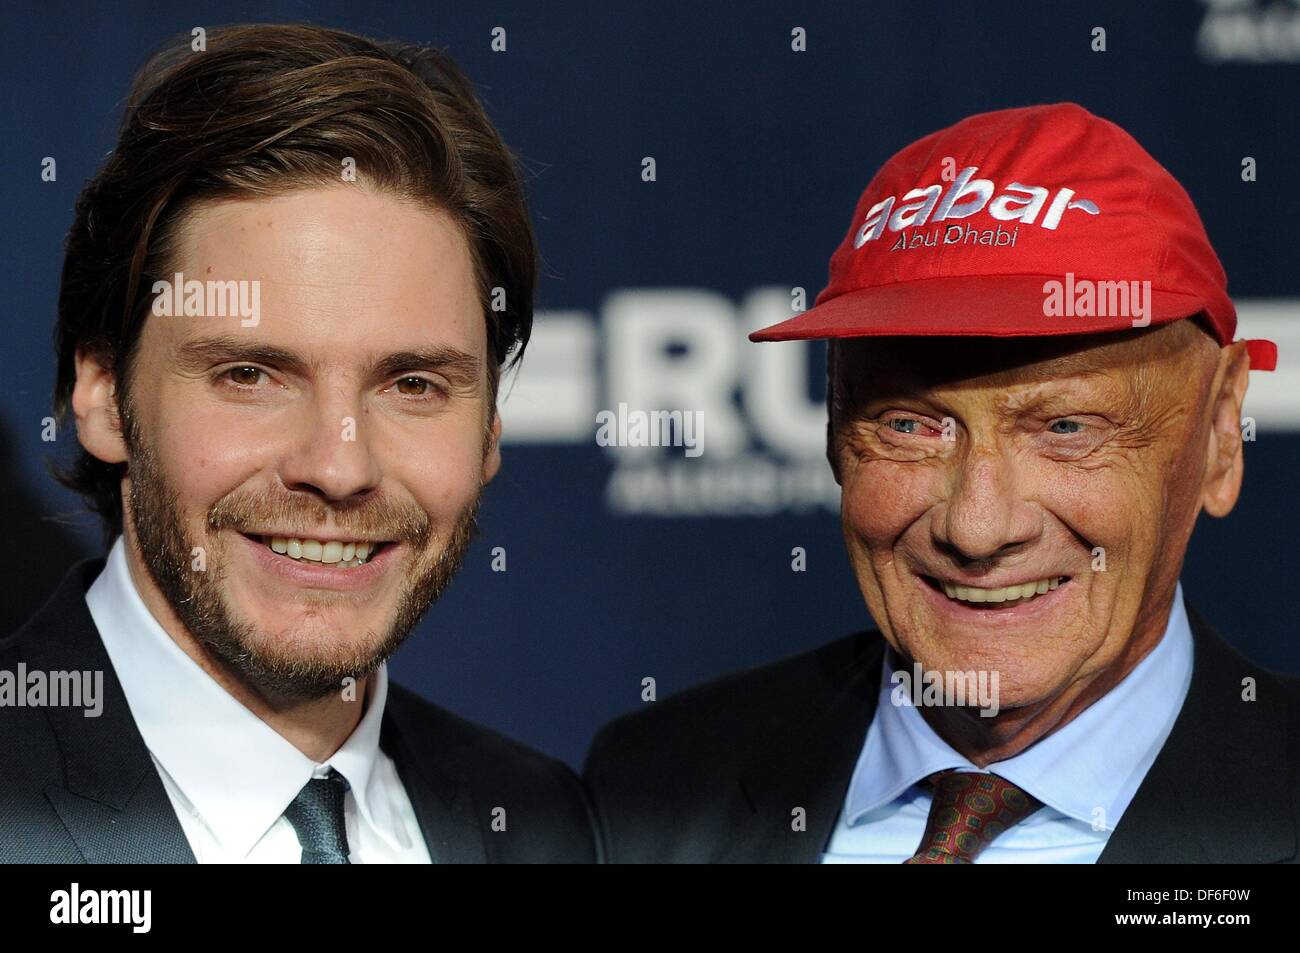 Niki Lauda And Daniel Bruehl High Resolution Stock Photography and Images -  Alamy